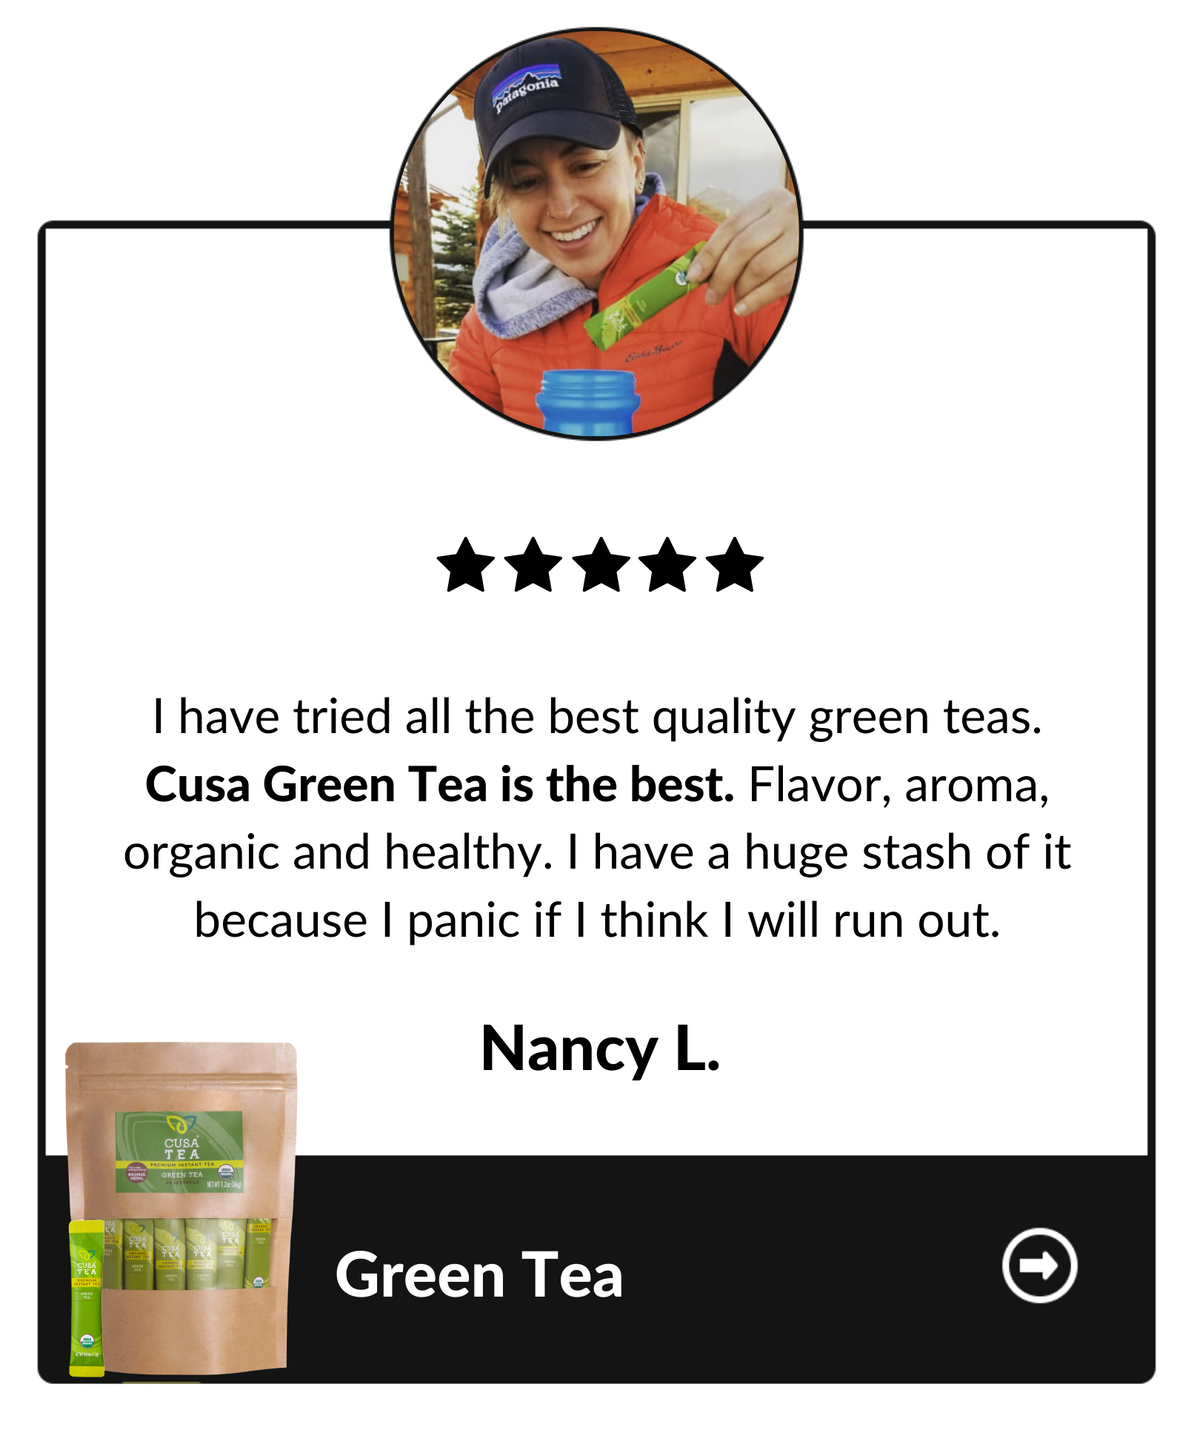 I have tried all of the best quality green teas. Cusa Green Tea is the best. Flavor, aroma, organic and healthy. I have a huge stash of it because I panic if I think I will run out. Nancy L, Green tea testimonial